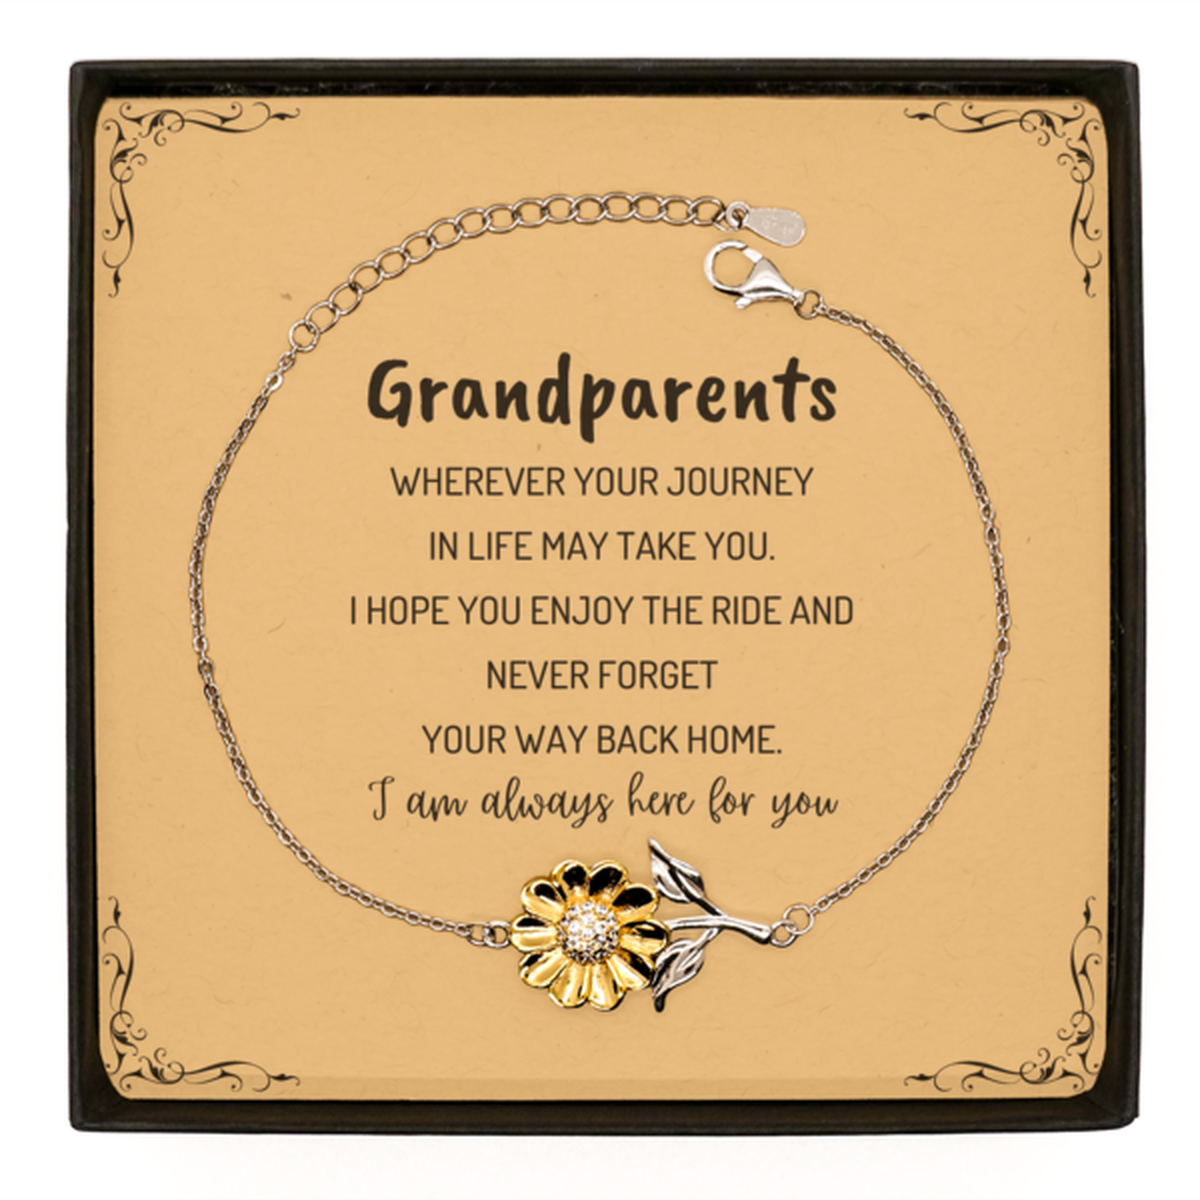 Grandparents wherever your journey in life may take you, I am always here for you Grandparents Sunflower Bracelet, Awesome Christmas Gifts For Grandparents Message Card, Grandparents Birthday Gifts for Men Women Family Loved One